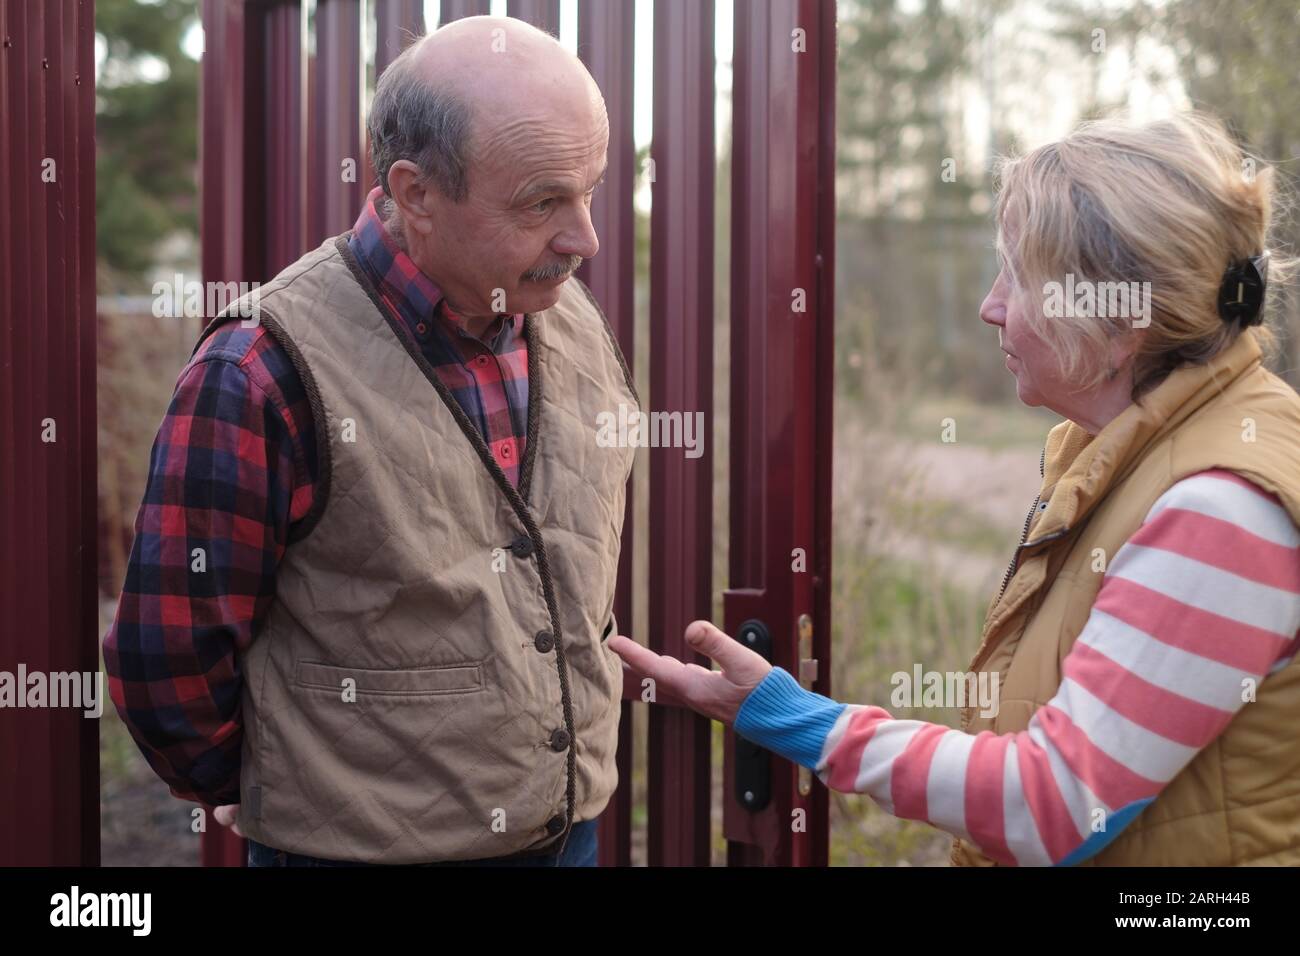 Retired woman talking to a senior man near fence. Neighbors discussing claims having different opinions. Stock Photo